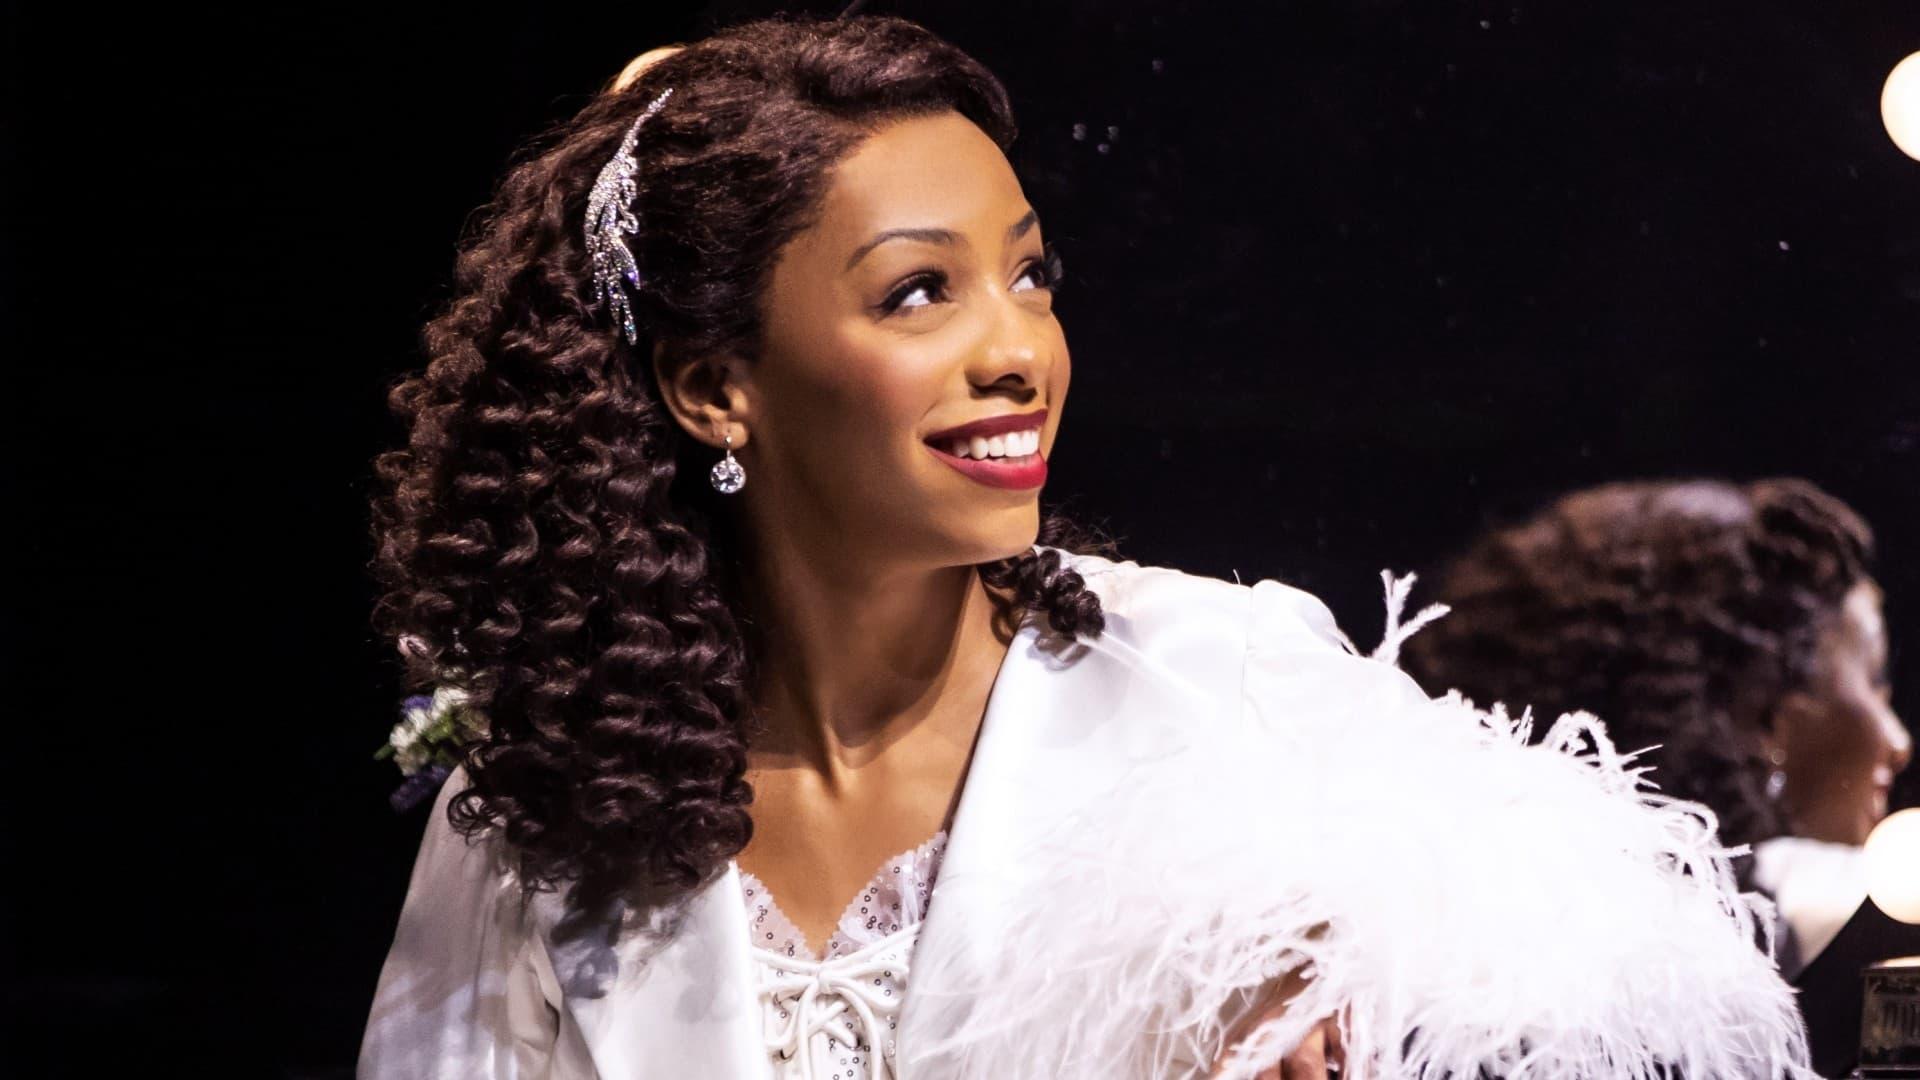 Queen of New York: Backstage at 'King Kong' with Christiani Pitts backdrop